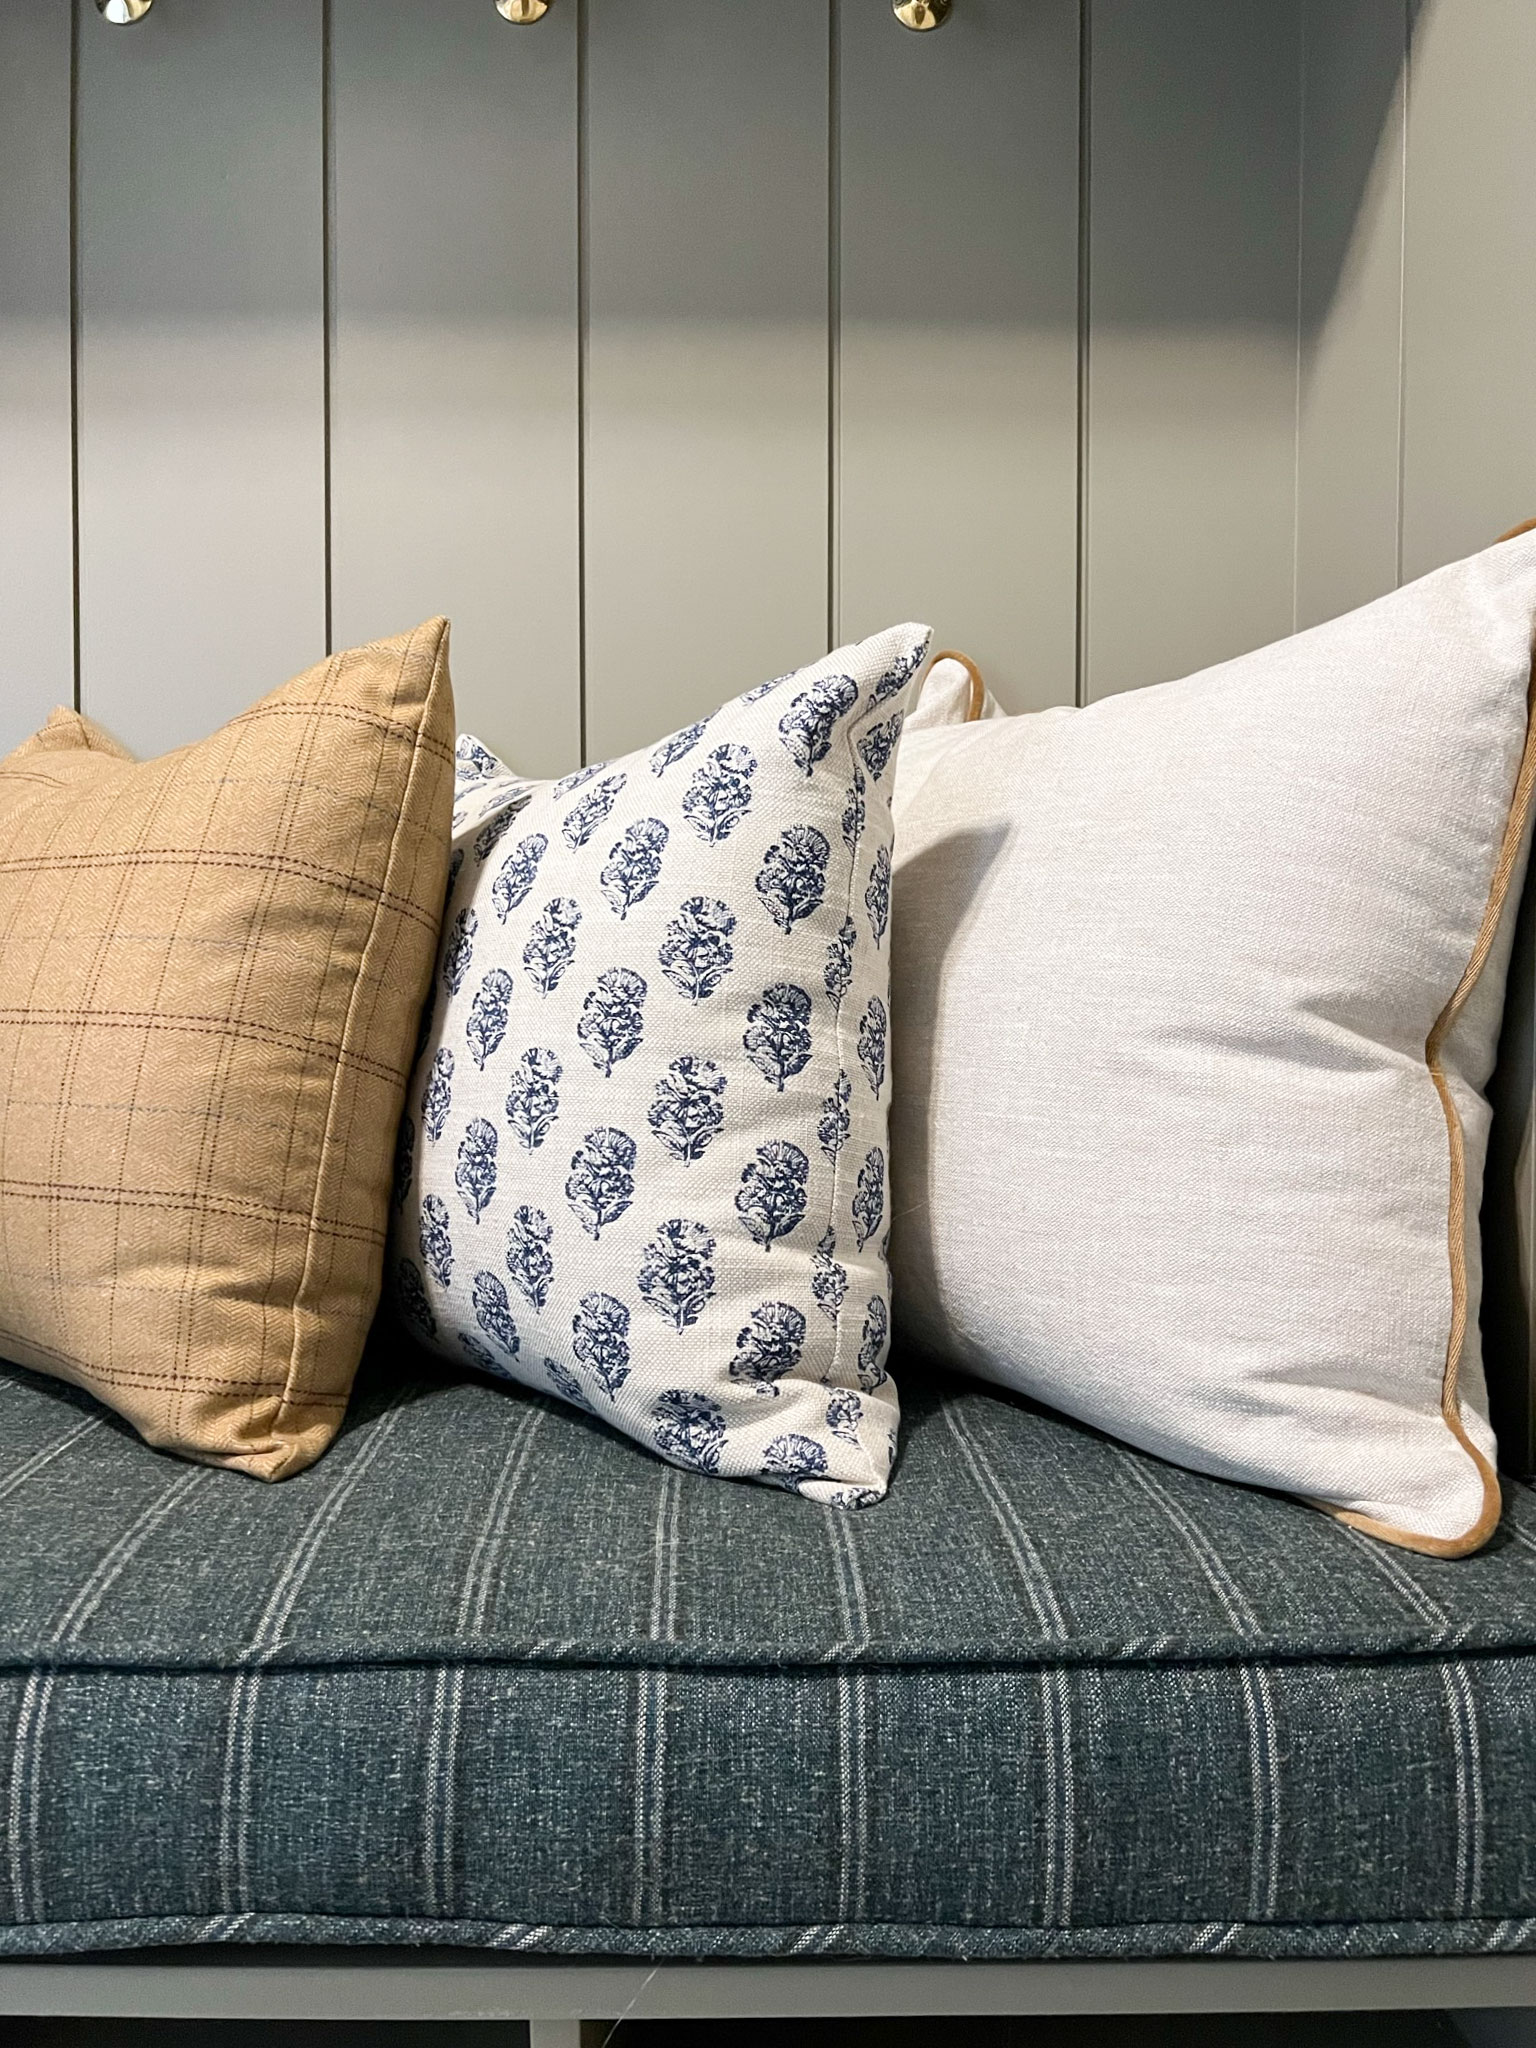 brown plaid pillow, blue block print pillow and white with brown piping pillow on a blue striped bench cushion 